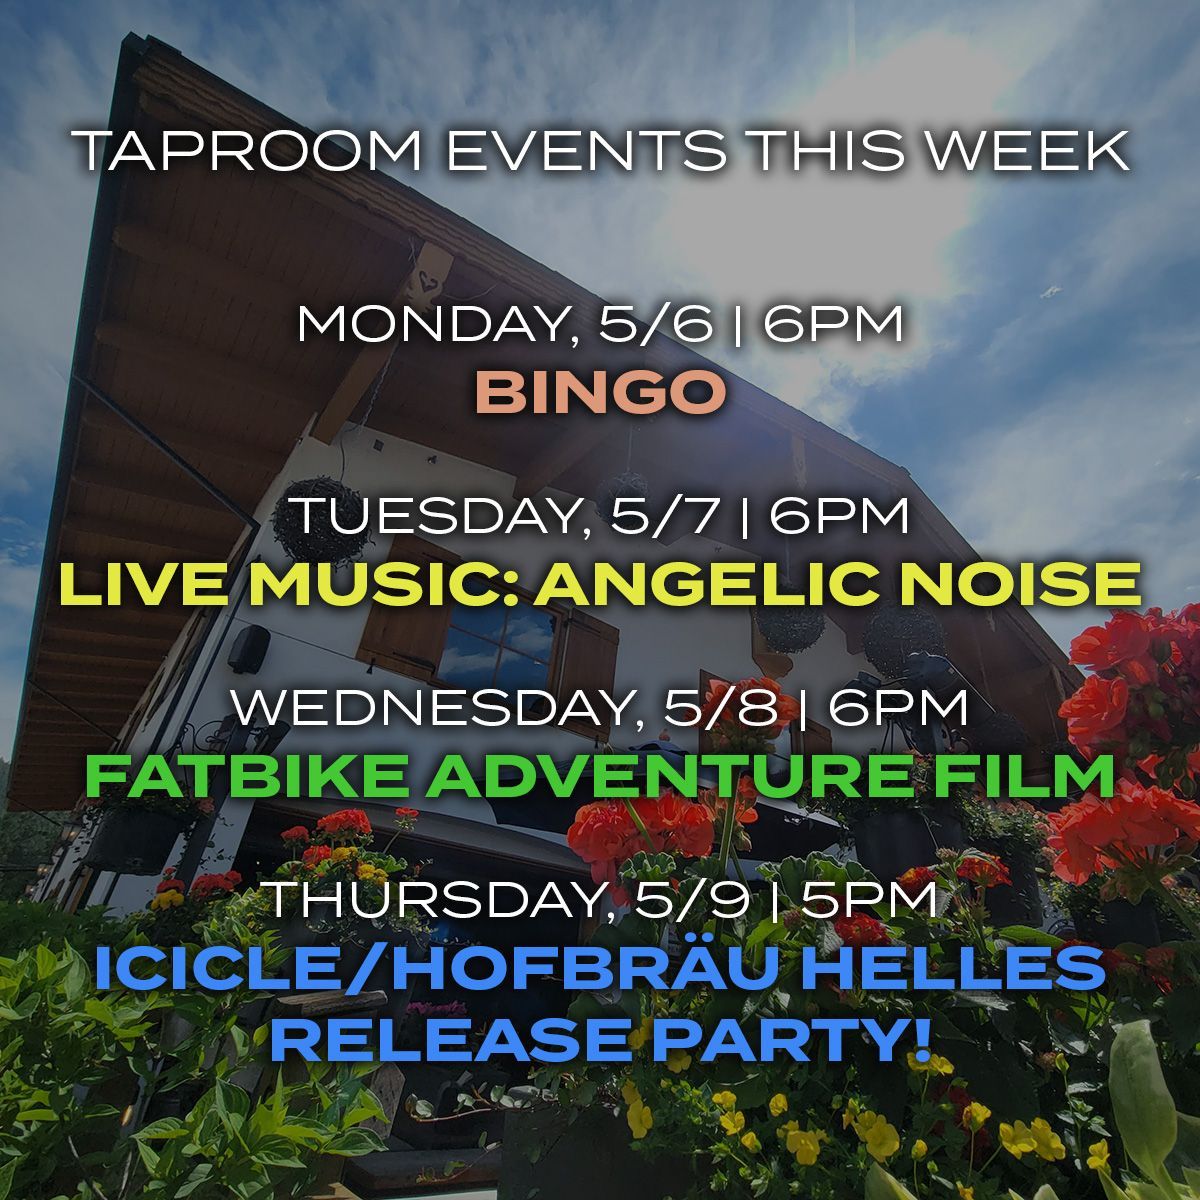 Big week of events at our taproom! Bingo tonight, live music Tuesday, A fat tire bike adventure movie on Wednesday, and the big ol' bash we're throwing on Thursday for our Icicle/Hofbräu Helles release party starting at 5pm!